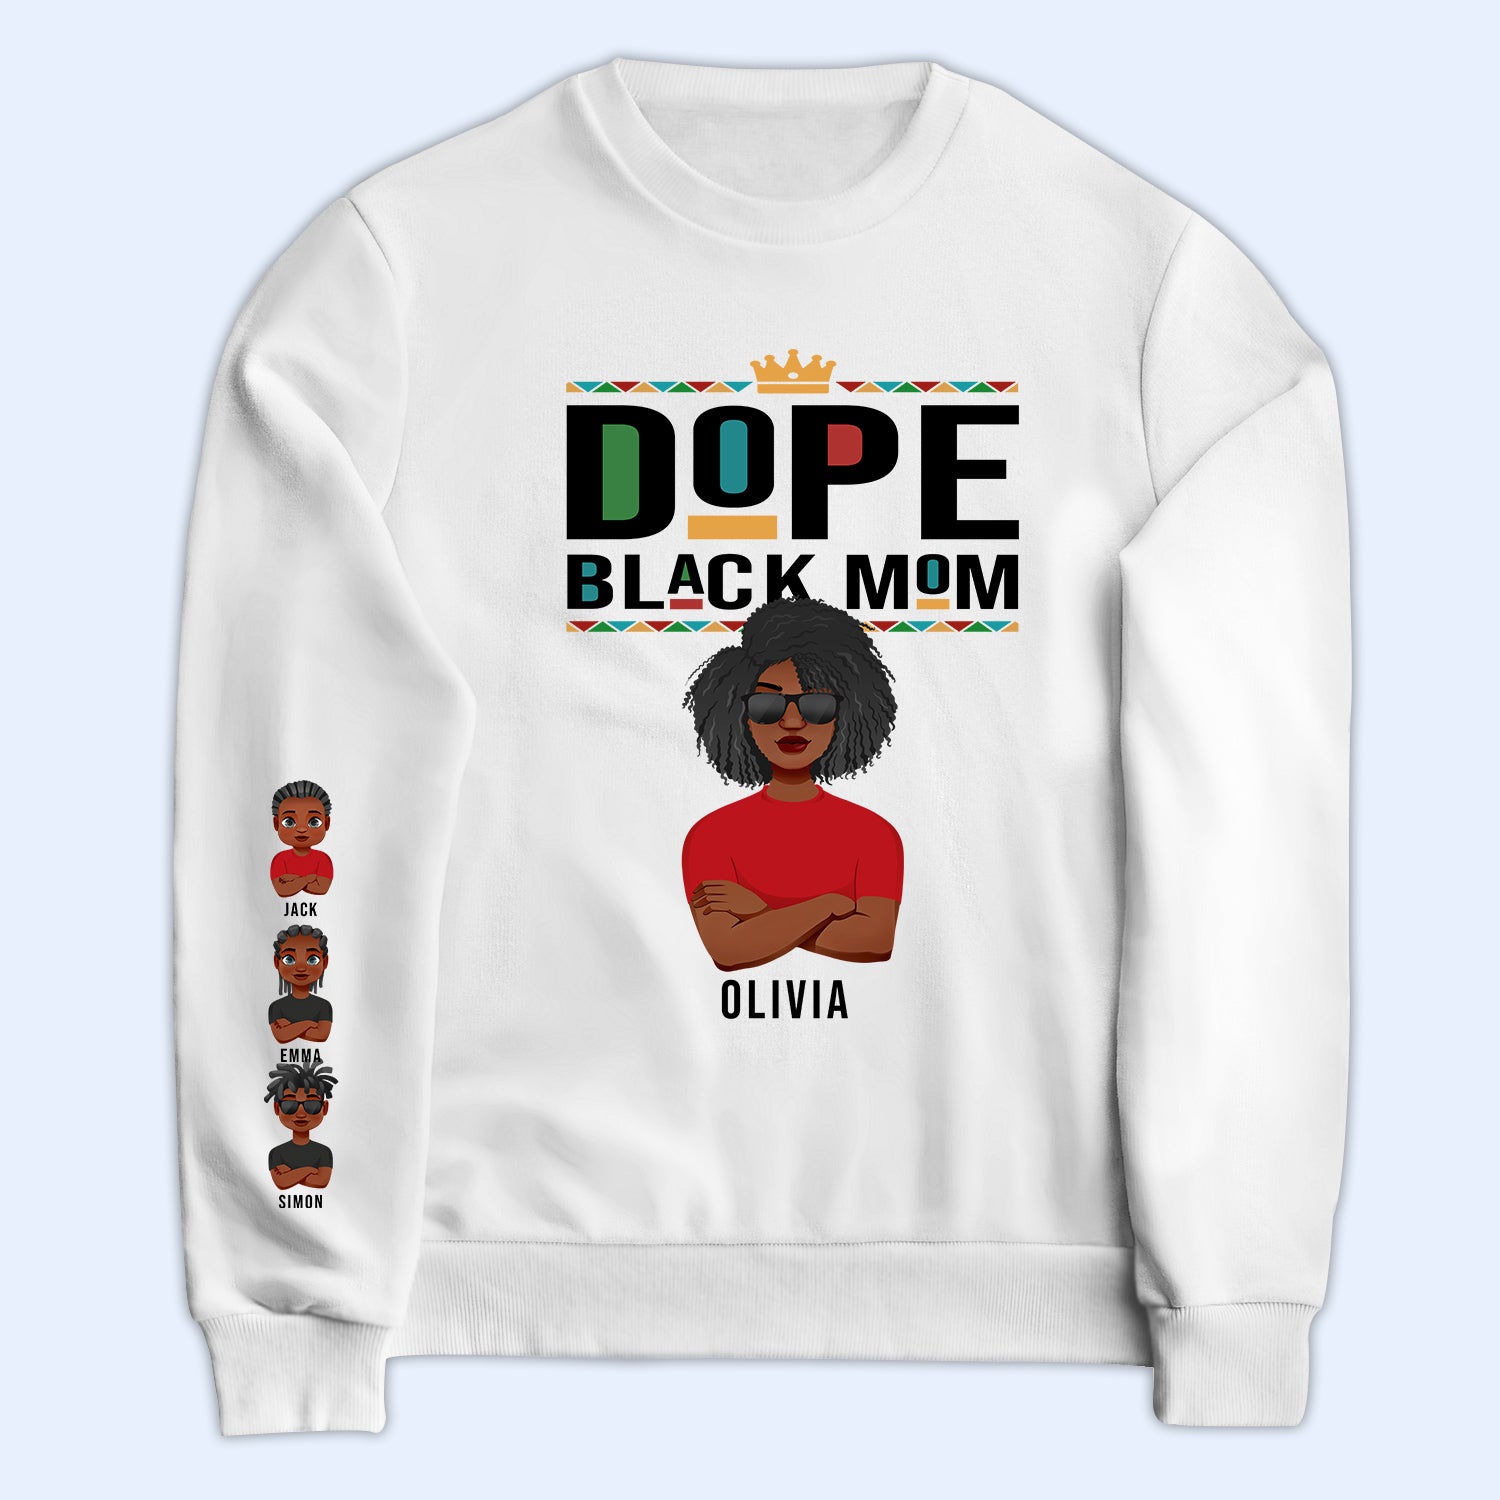 Dope Black Mom - Gift For Black Mom - Personalized Sweatshirt With Sleeve Imprint